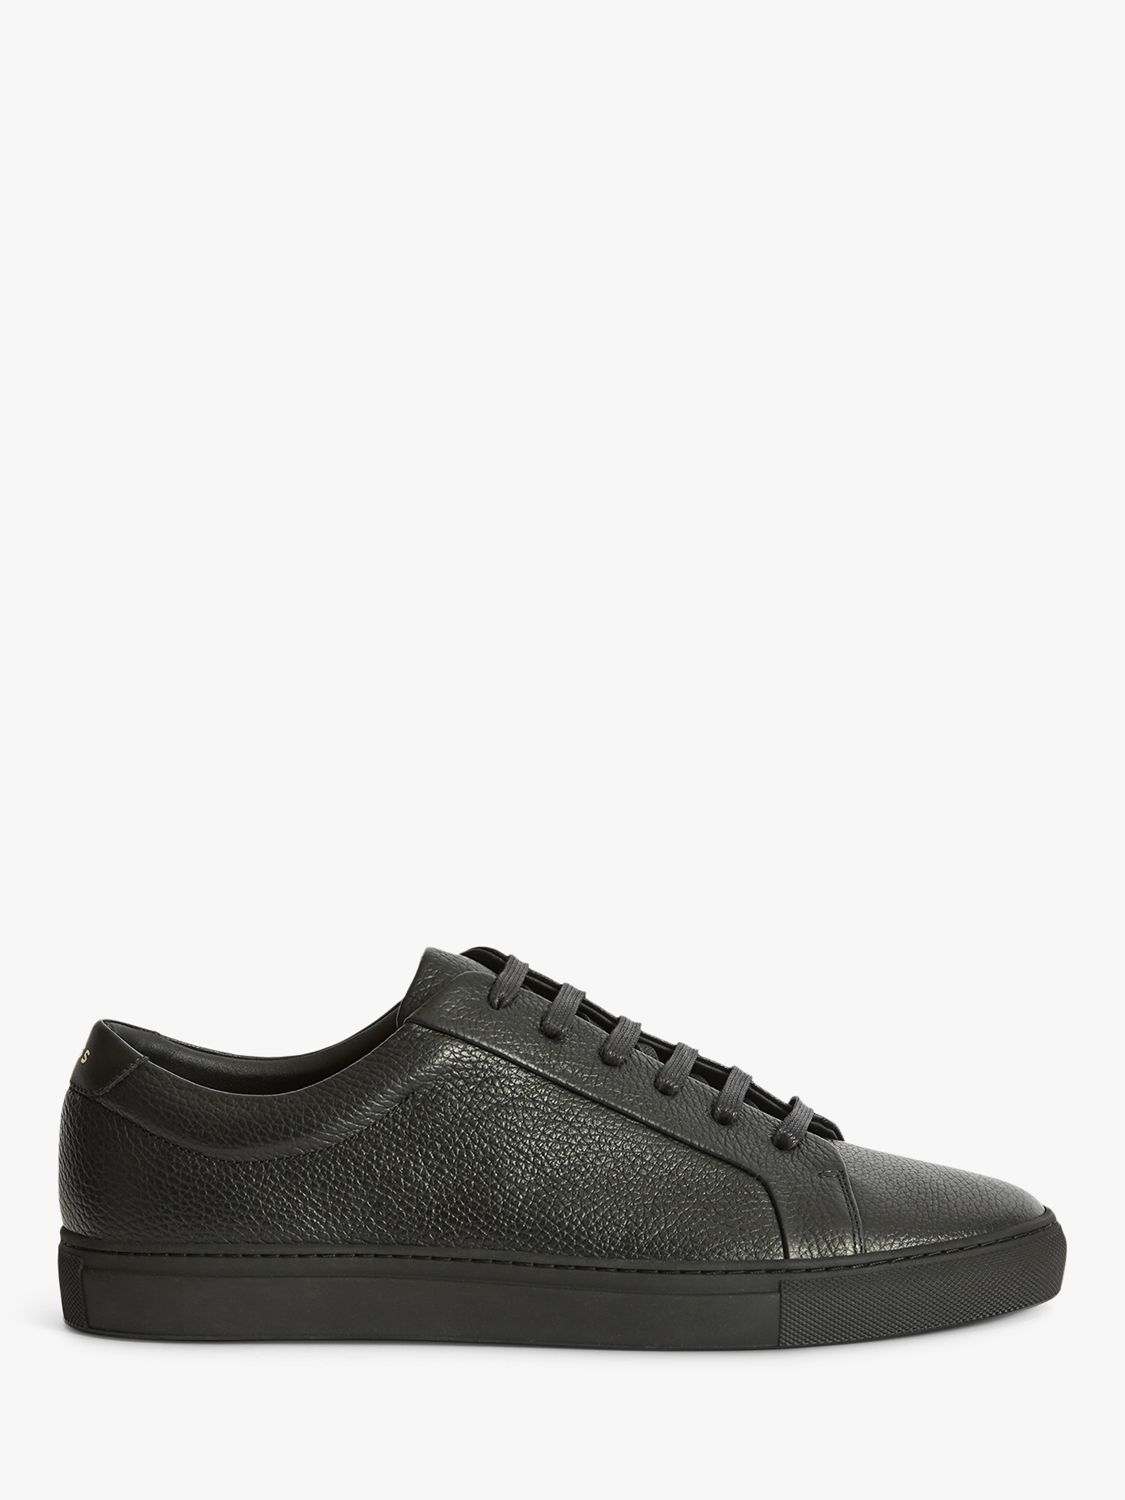 Reiss Luca Leather Trainers, Black at John Lewis & Partners